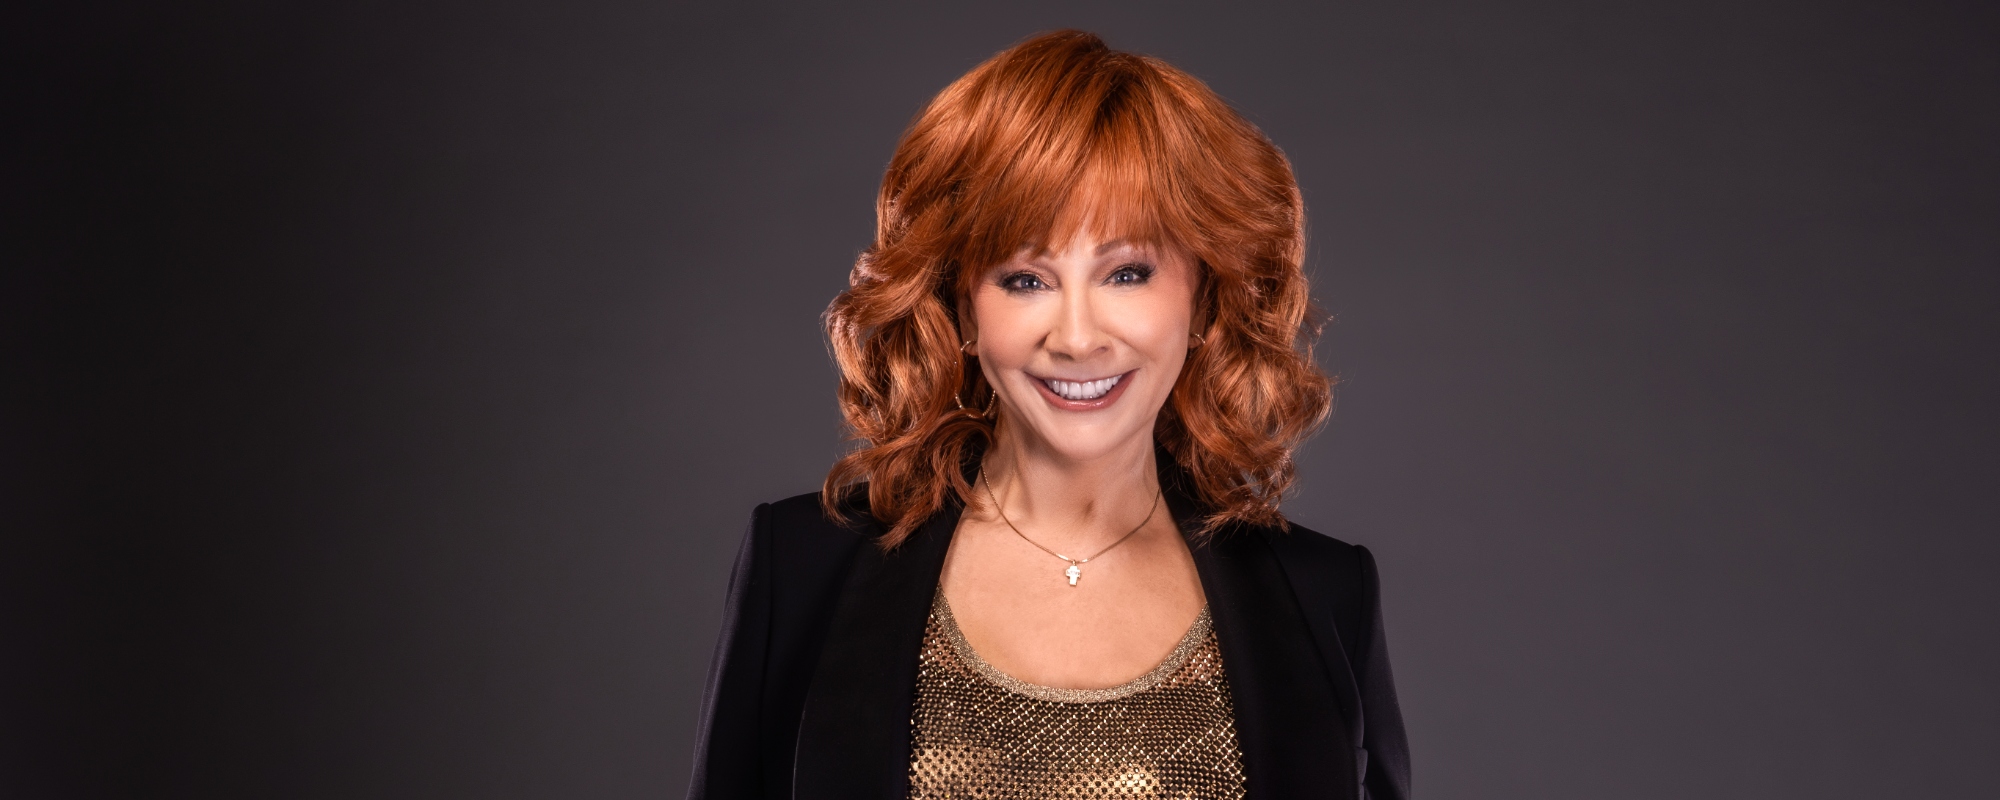 Reba McEntire to Host Academy of Country Music Awards for 17th Time, Perform New Music